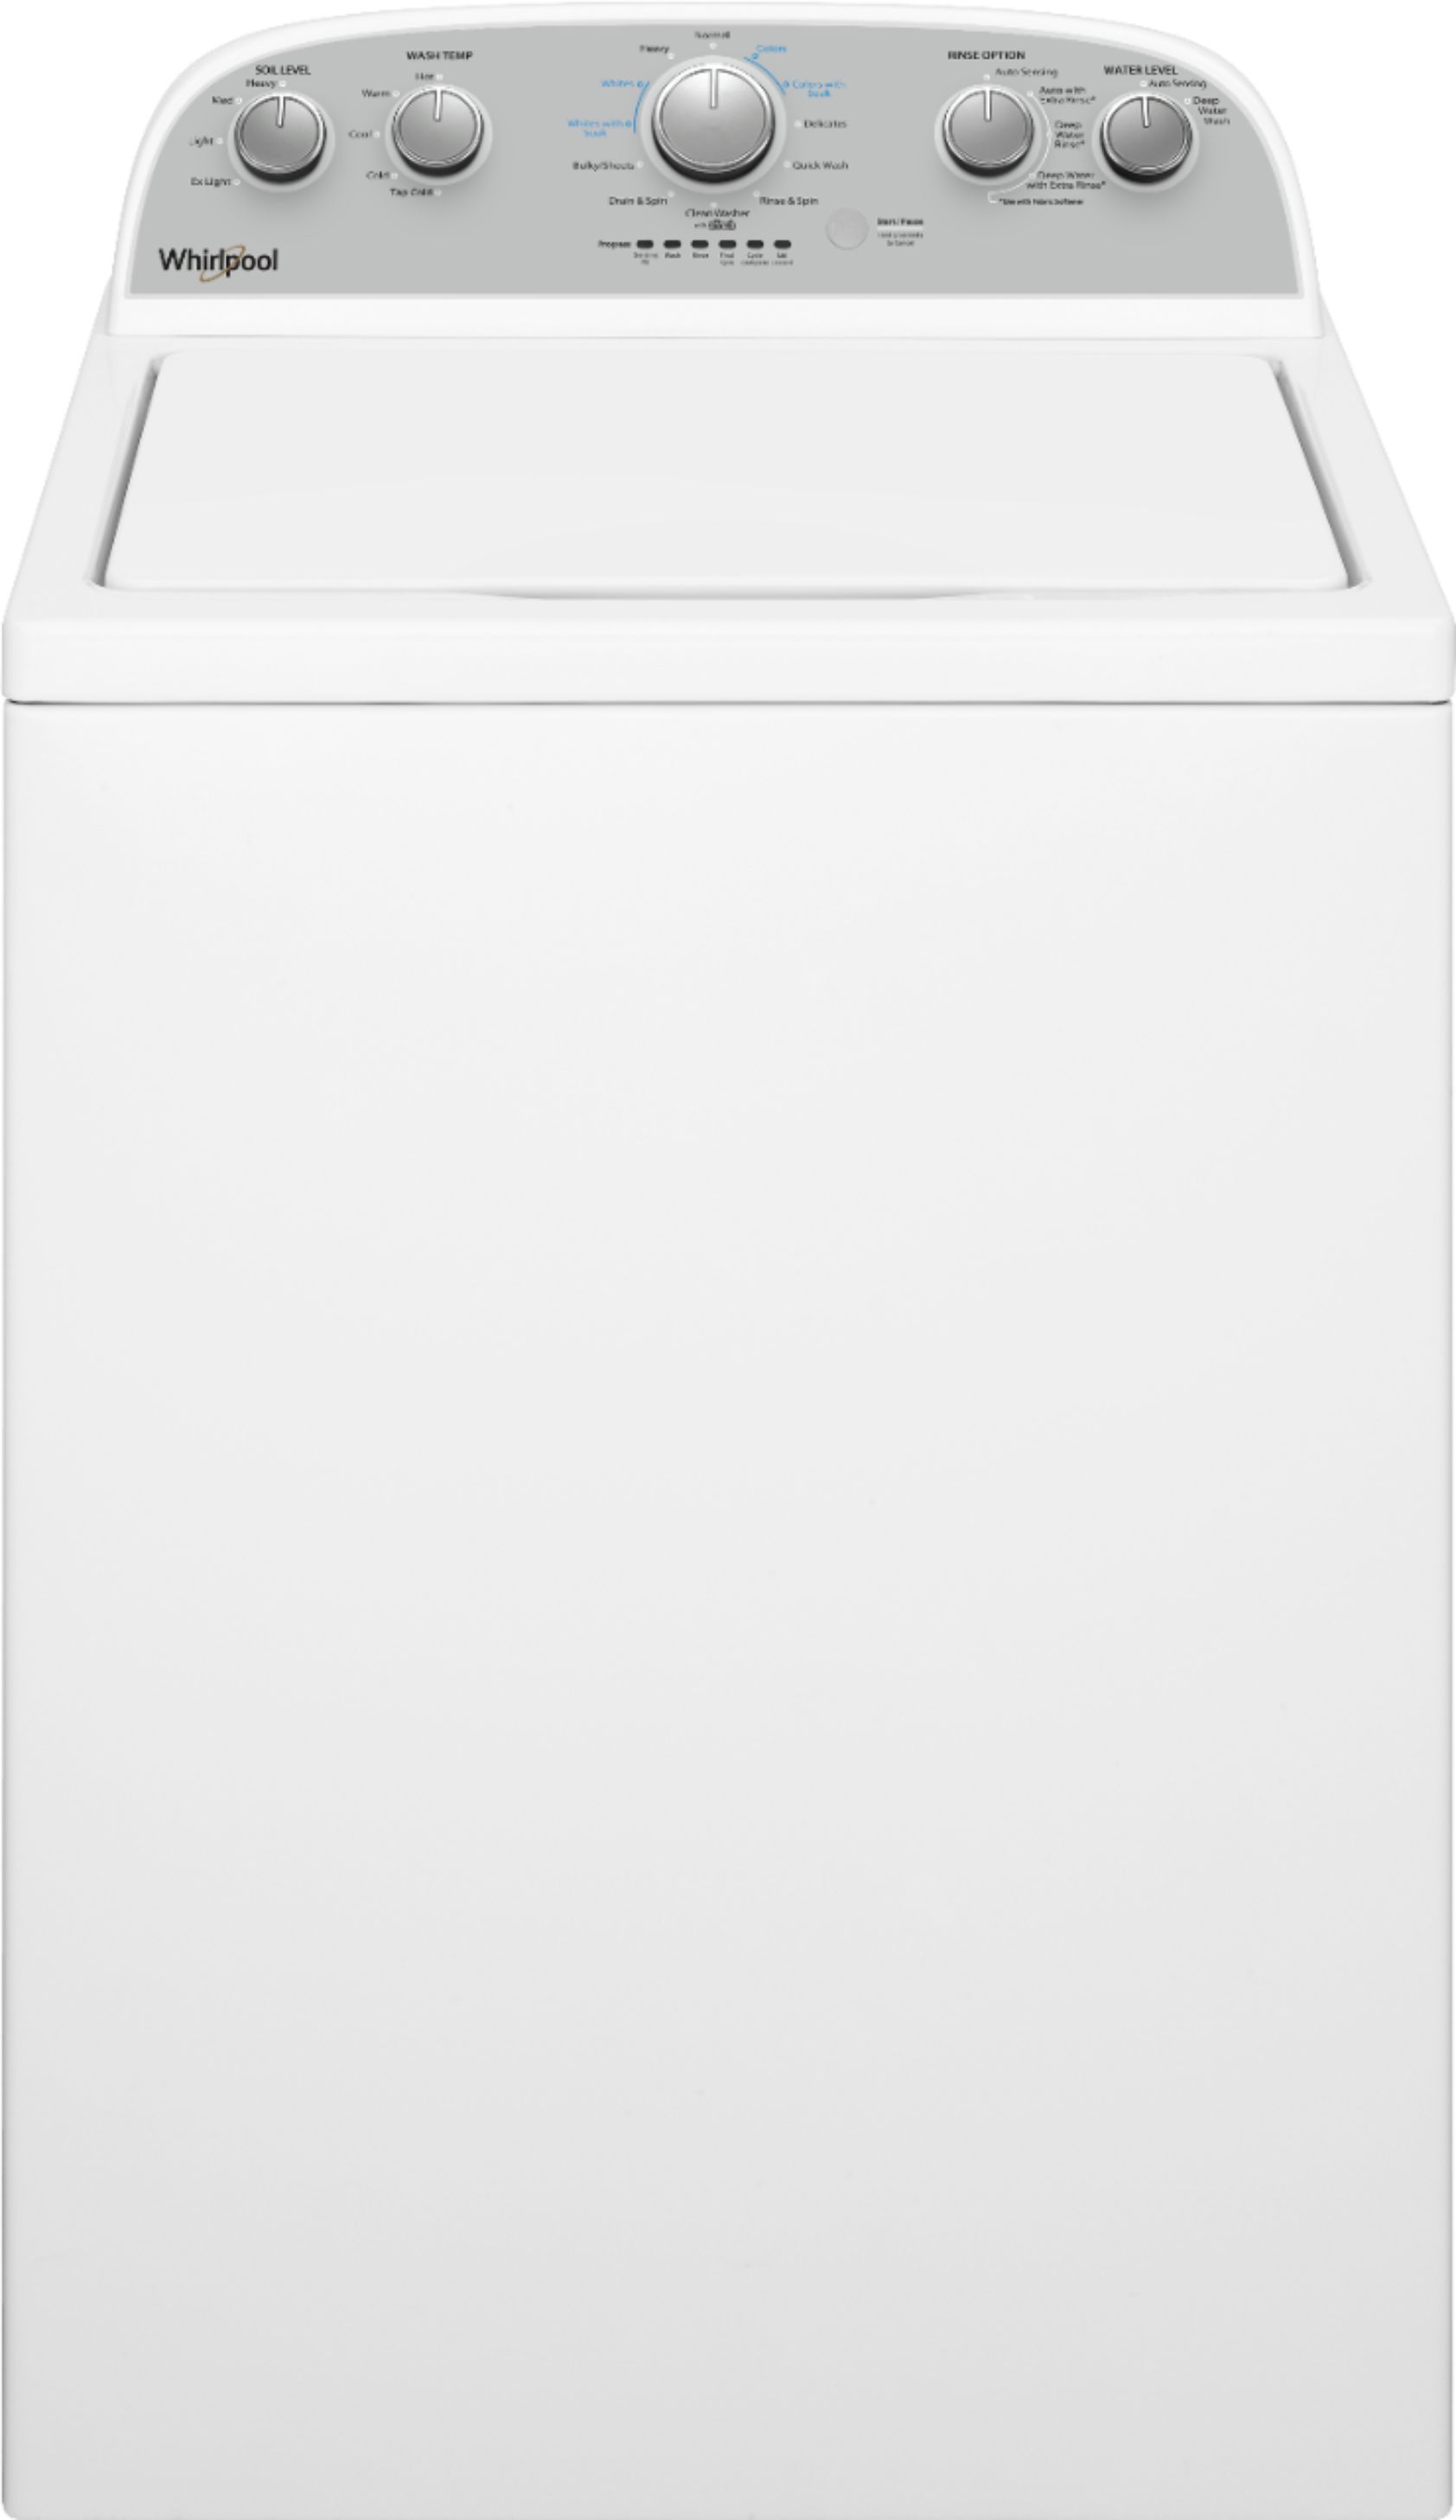 Whirlpool 3.8 Cu. Ft. High Efficiency Top Load Washer with 360 Wash Agitator White WTW4955HW - Be... | Best Buy U.S.